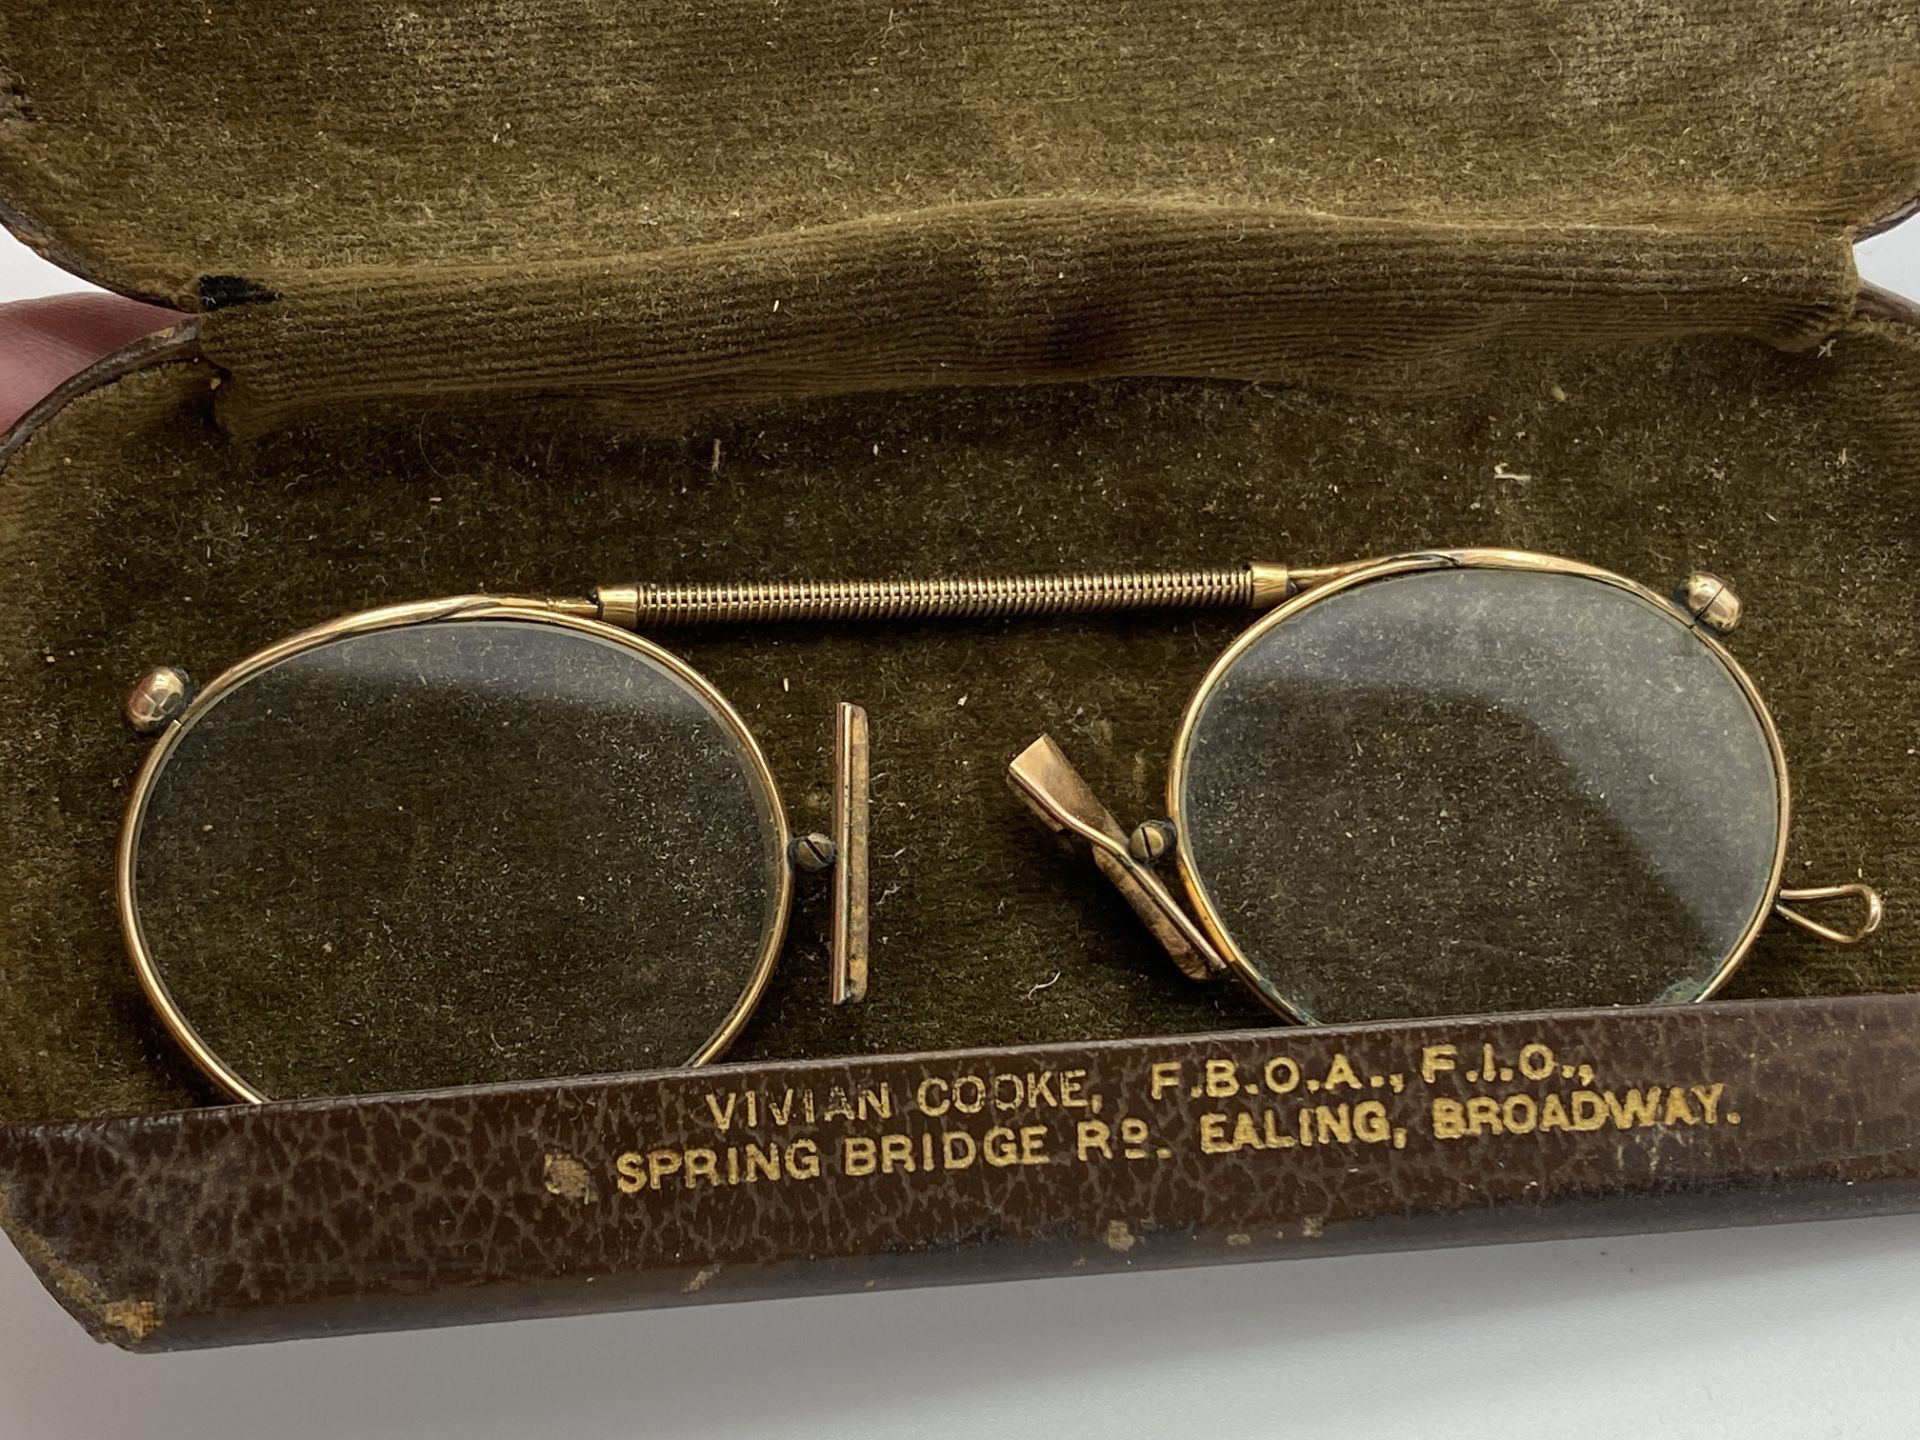 ANTIQUE 10CT GOLD SPECTACLES (GLASSES) WITH METAL CASE - Image 6 of 7